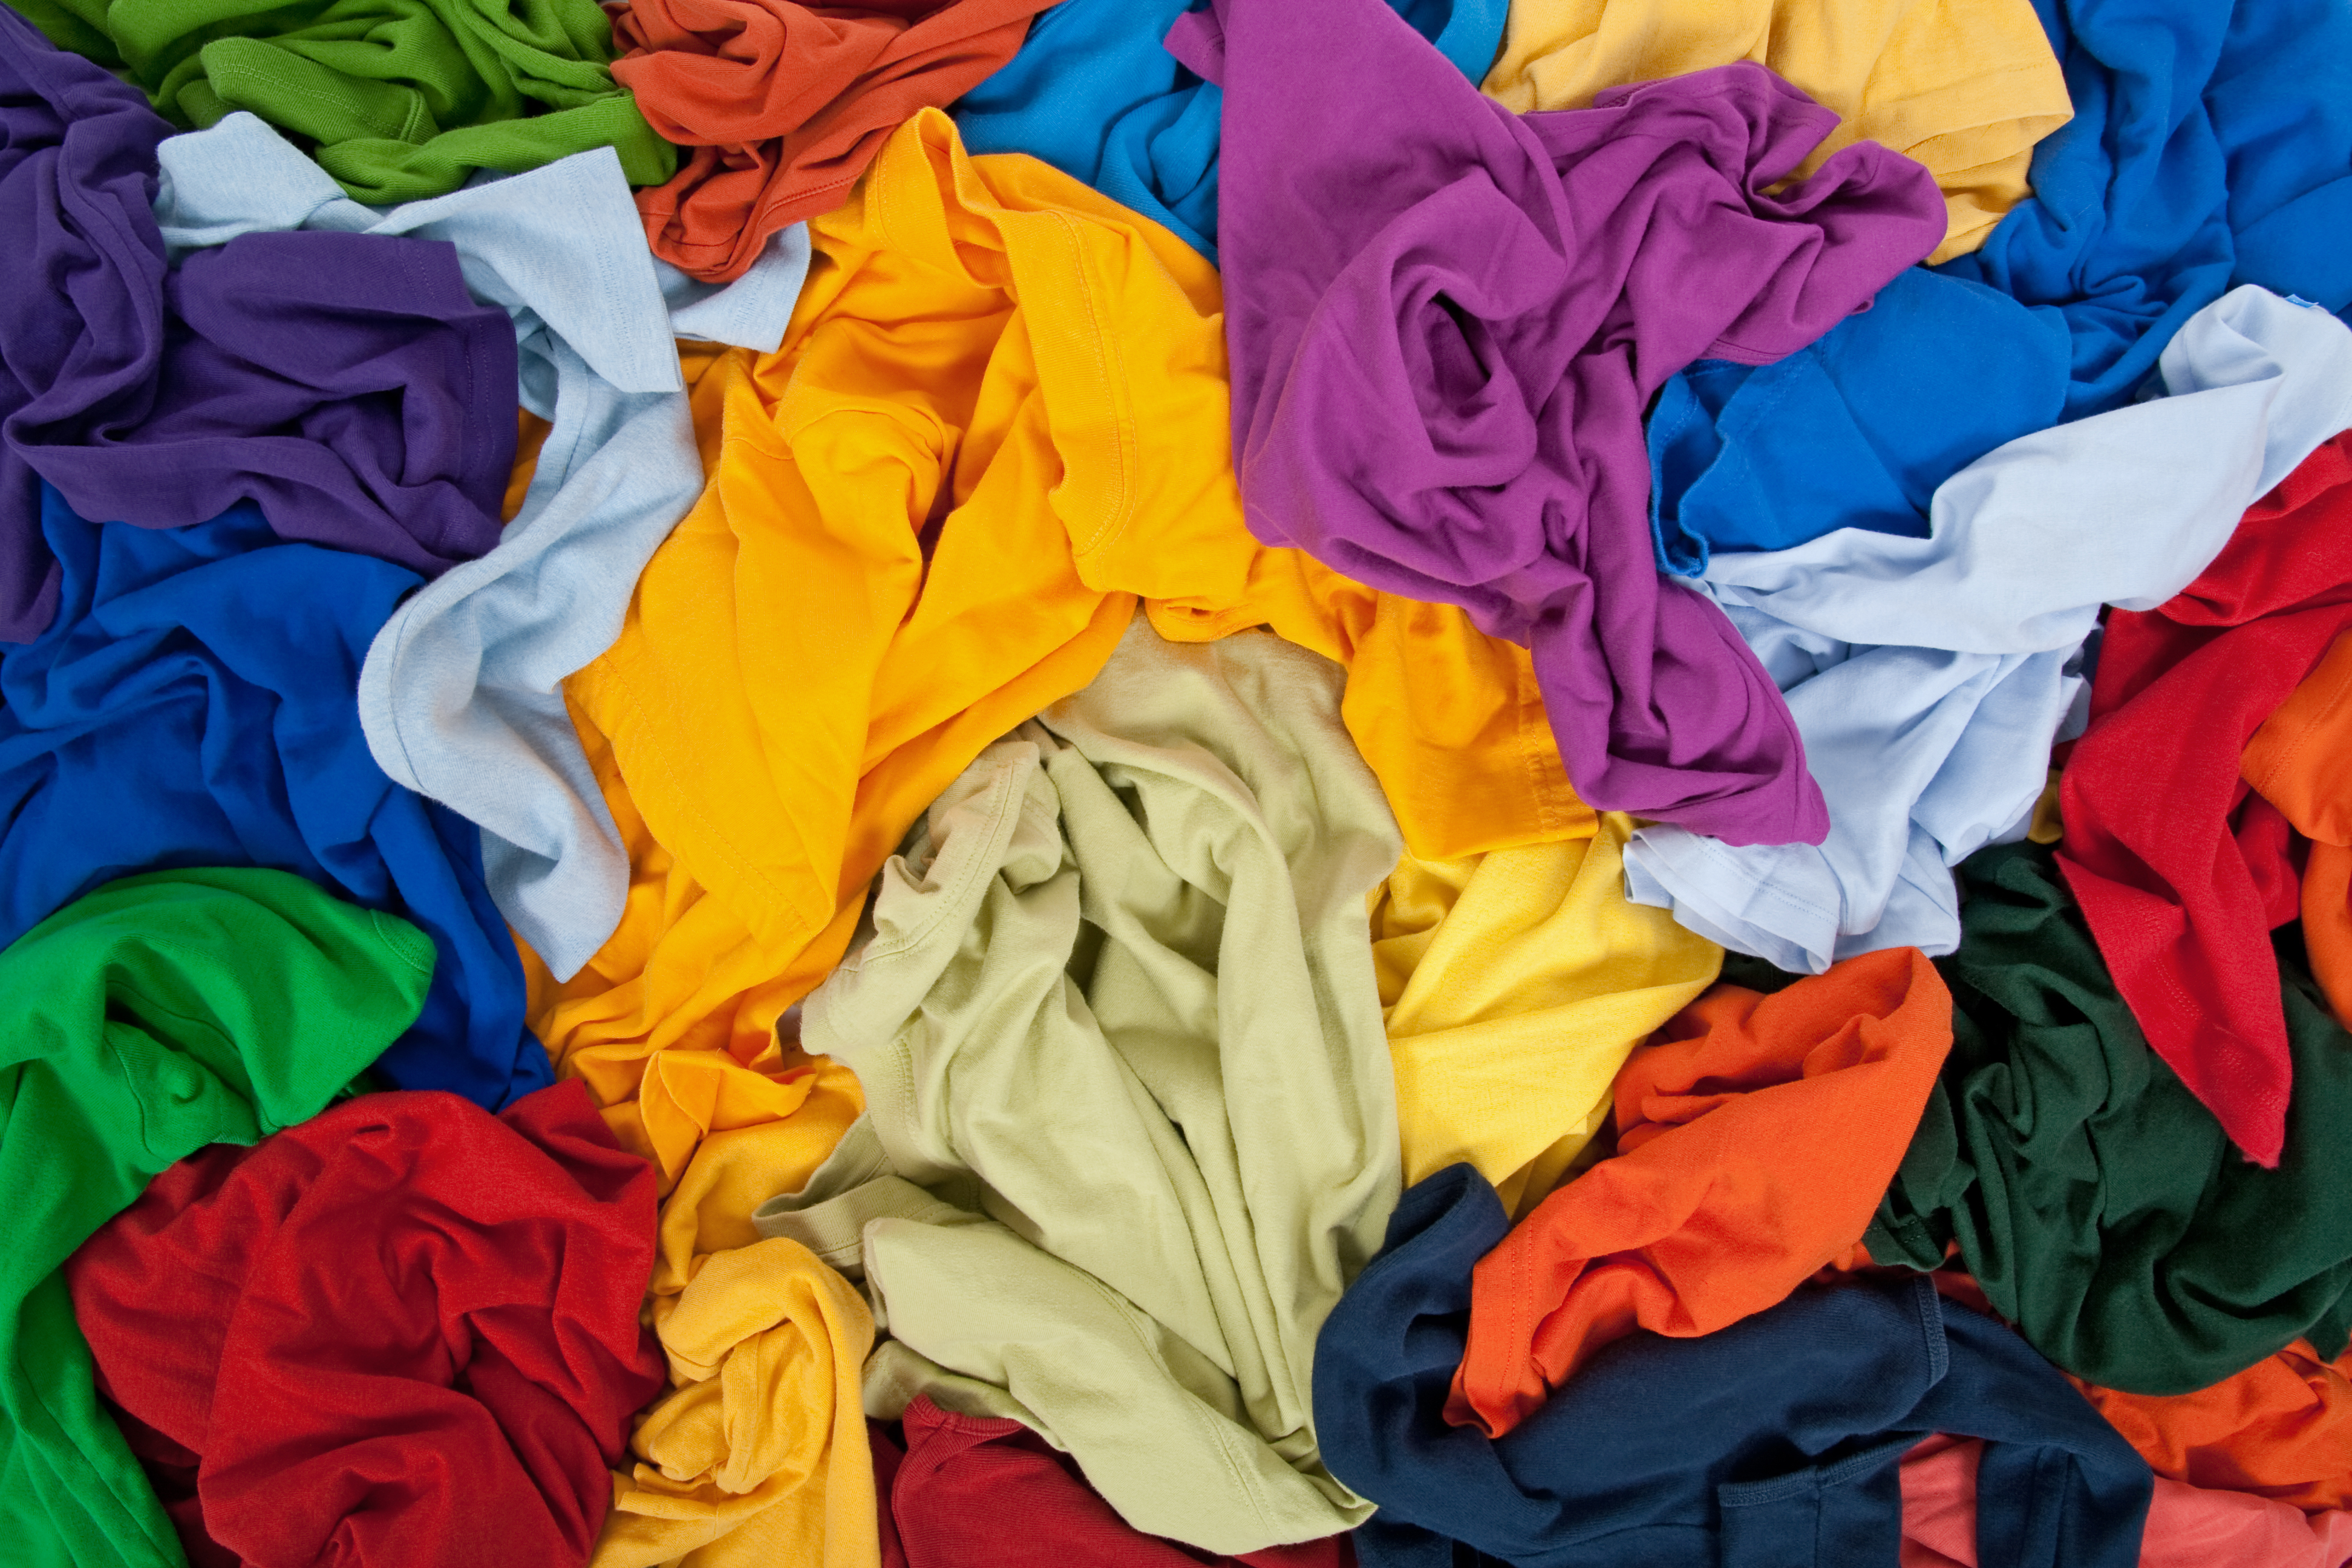 A photo of a pile of colourful clothes.